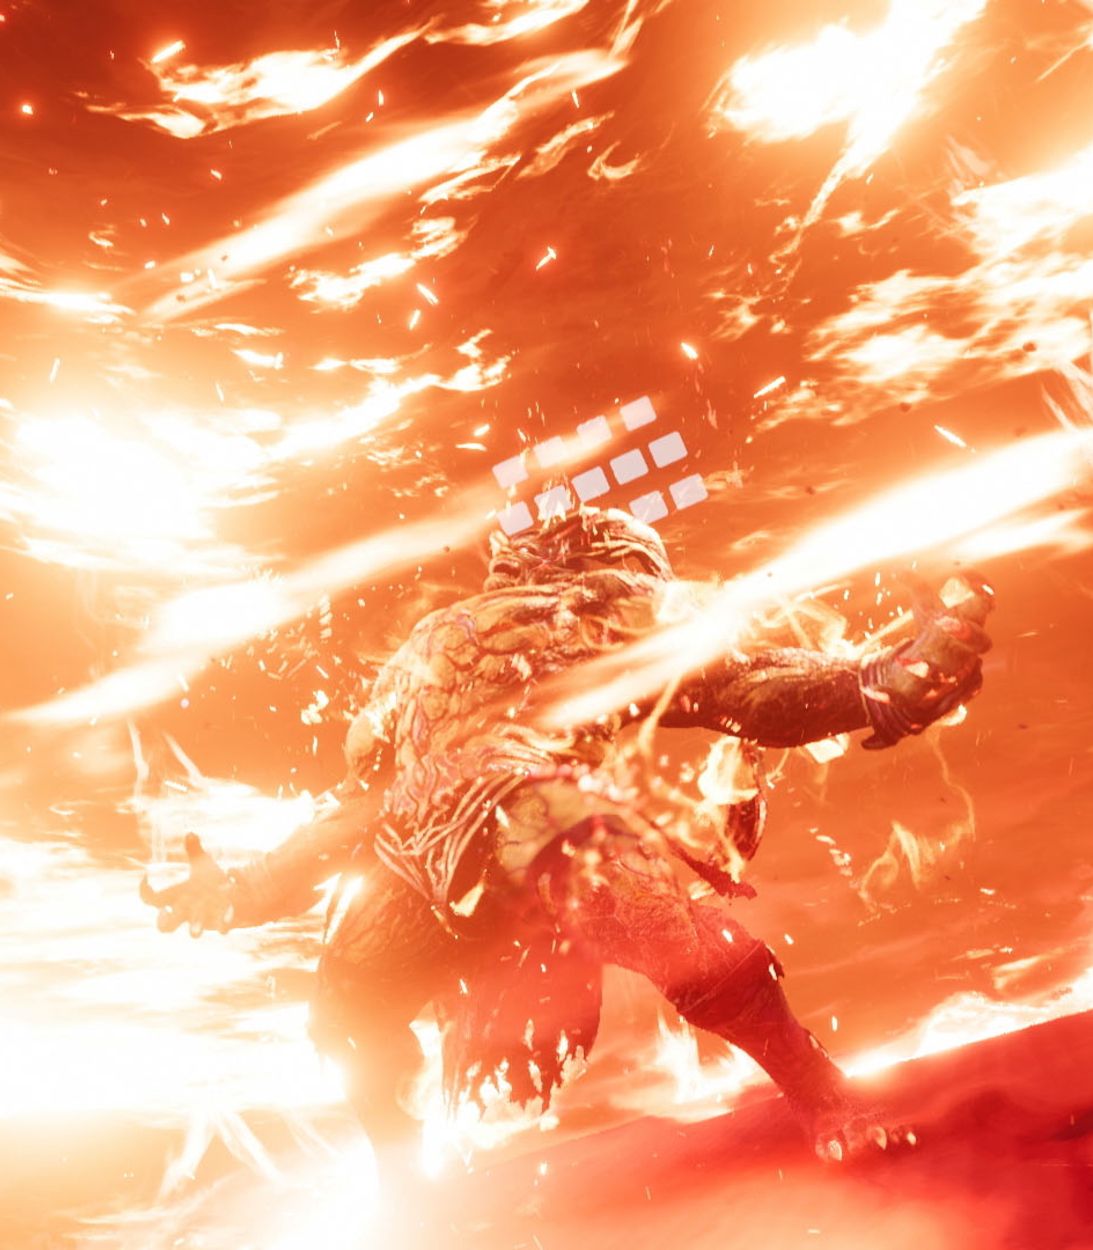 FF7 Remake Ifrit Summon Vertical